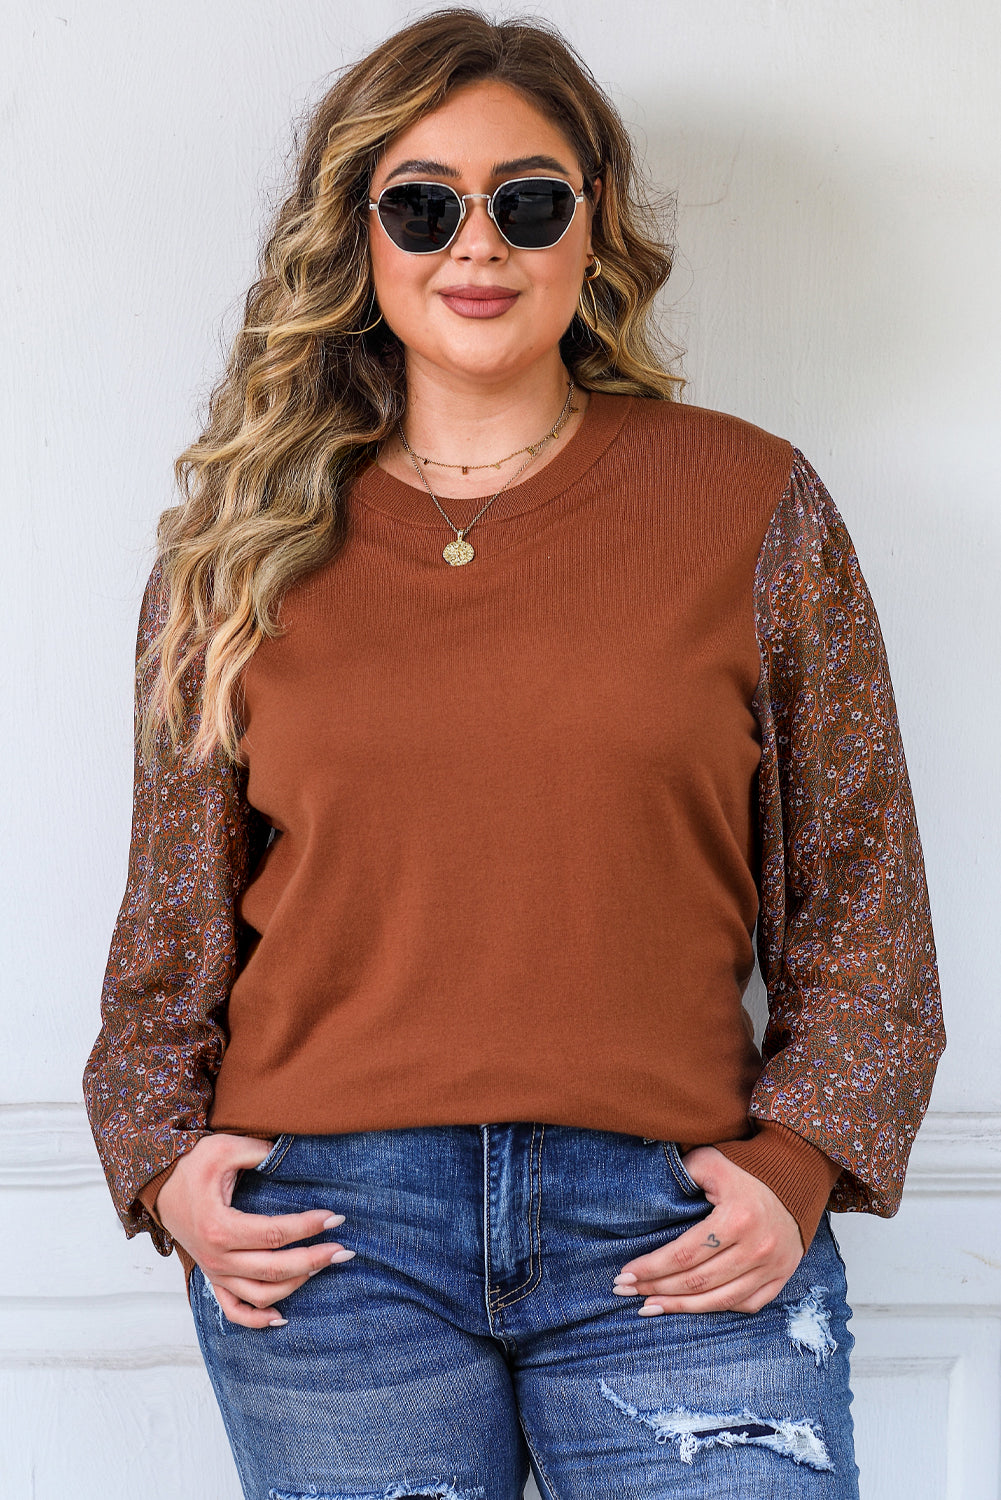 Brown Plus Size Printed Splicing Sleeve Ribbed Trim Sweater